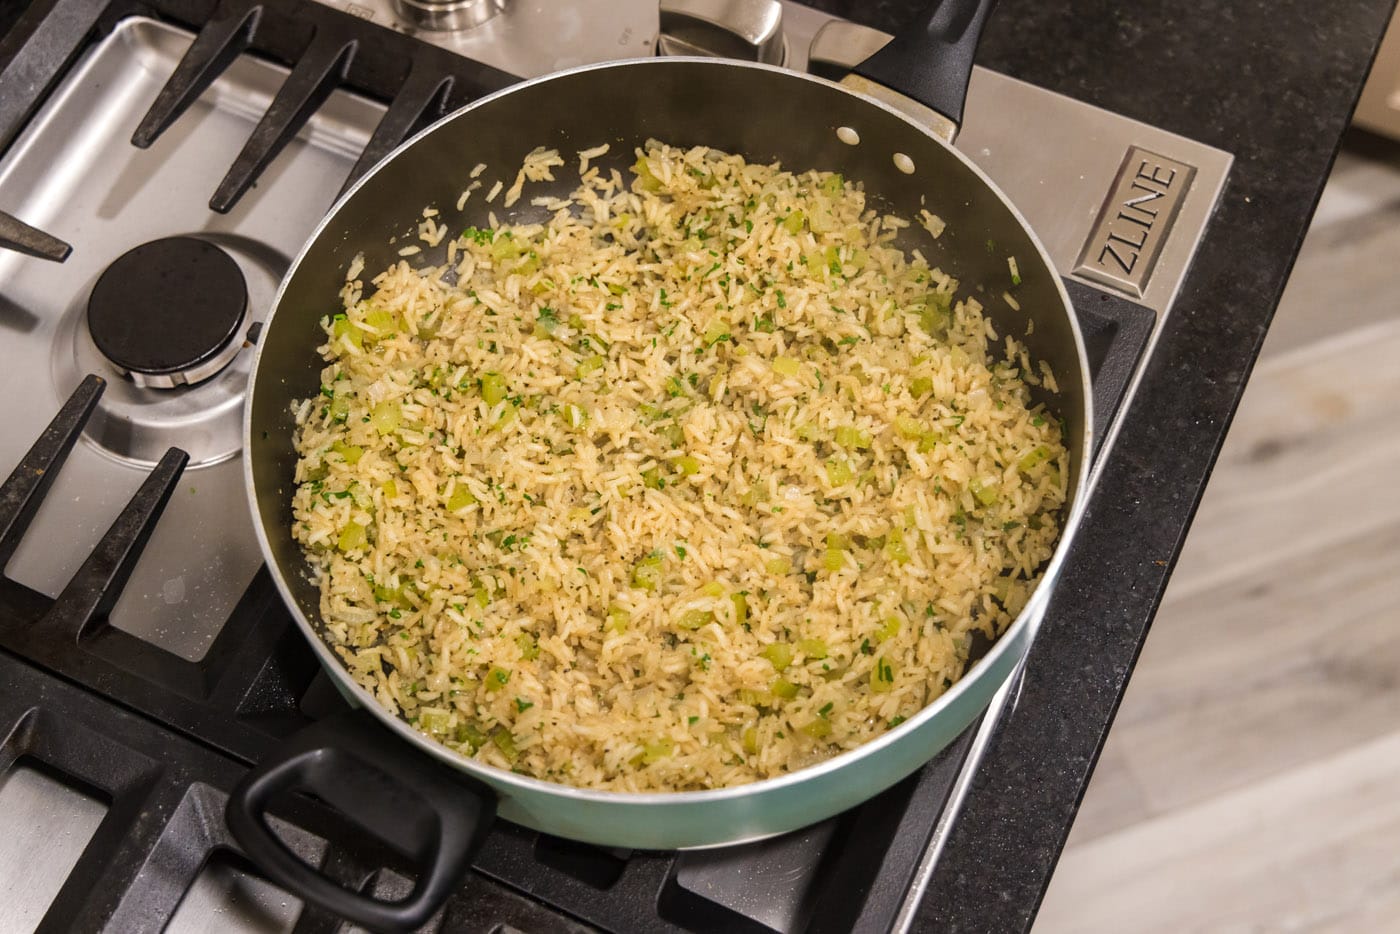 minced parsley added to rice pilaf